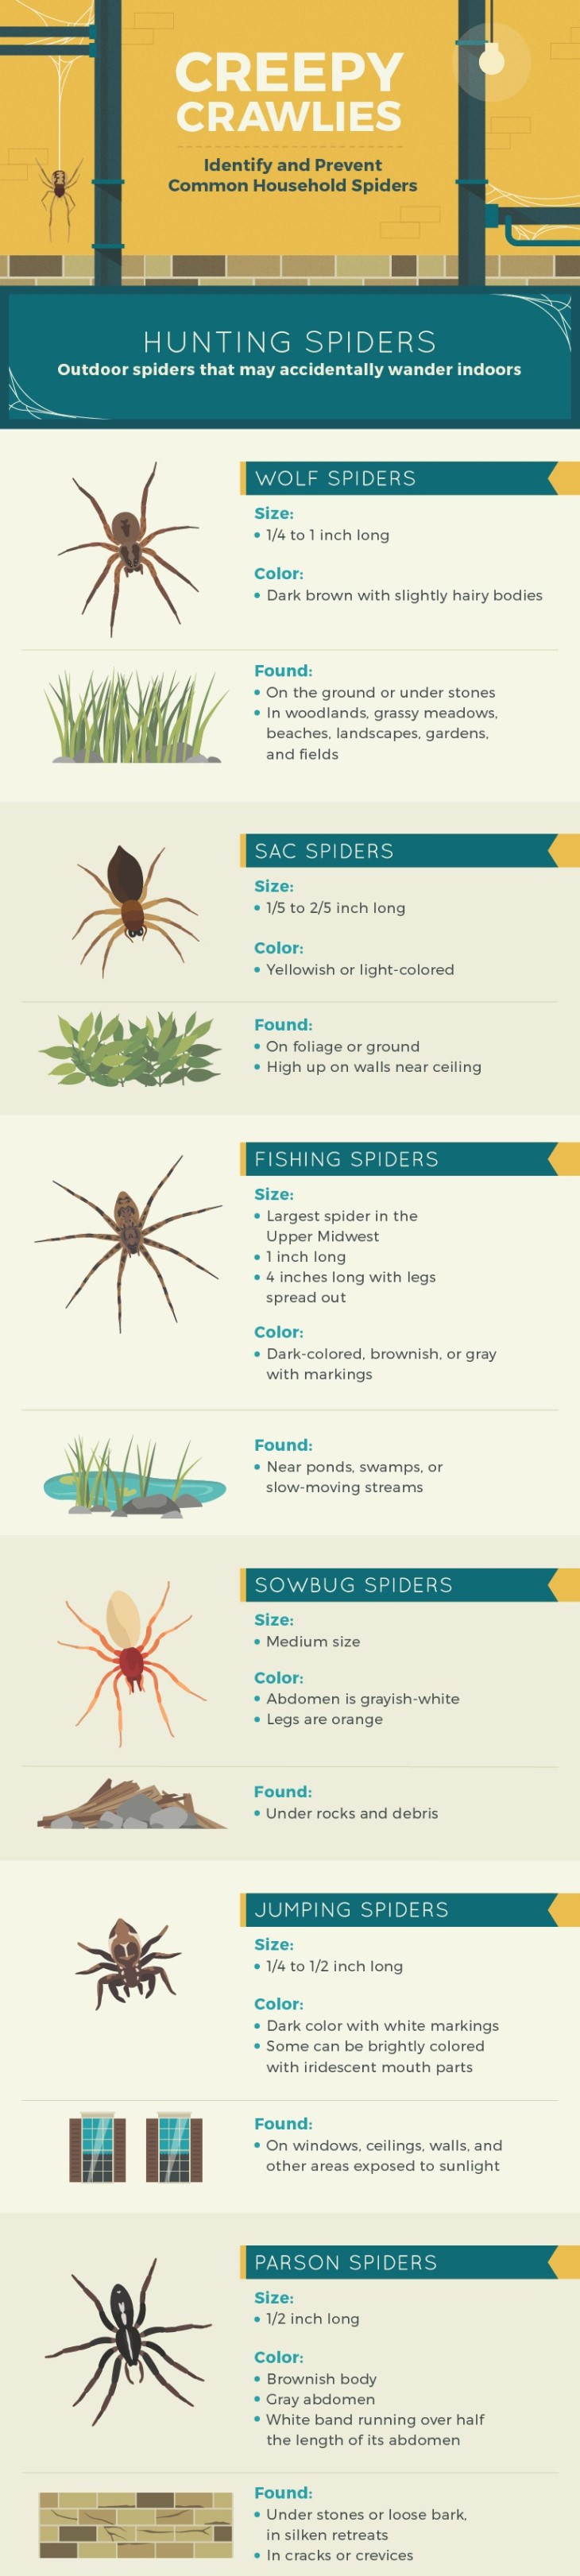 guide for identifying house spiders infographic